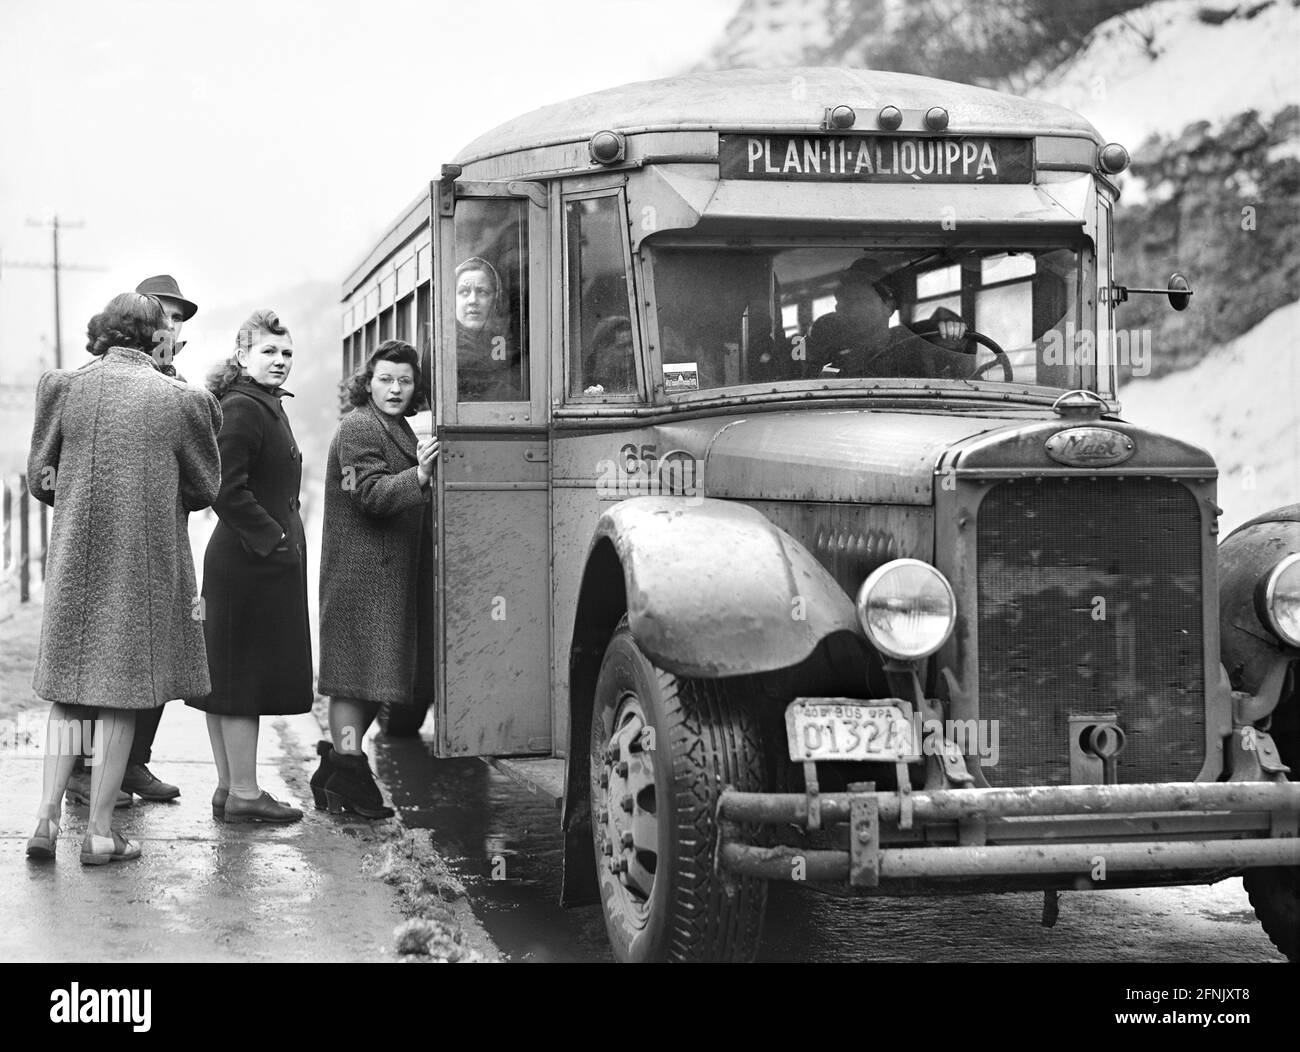 Young Women boarding Bus to go home at end of Workday, Jones and Laughlin  Steel Corporation, Aliquippa, Pennsylvania, USA, Jack Delano, U.S. Office  of War Information, January 1941 Stock Photo - Alamy